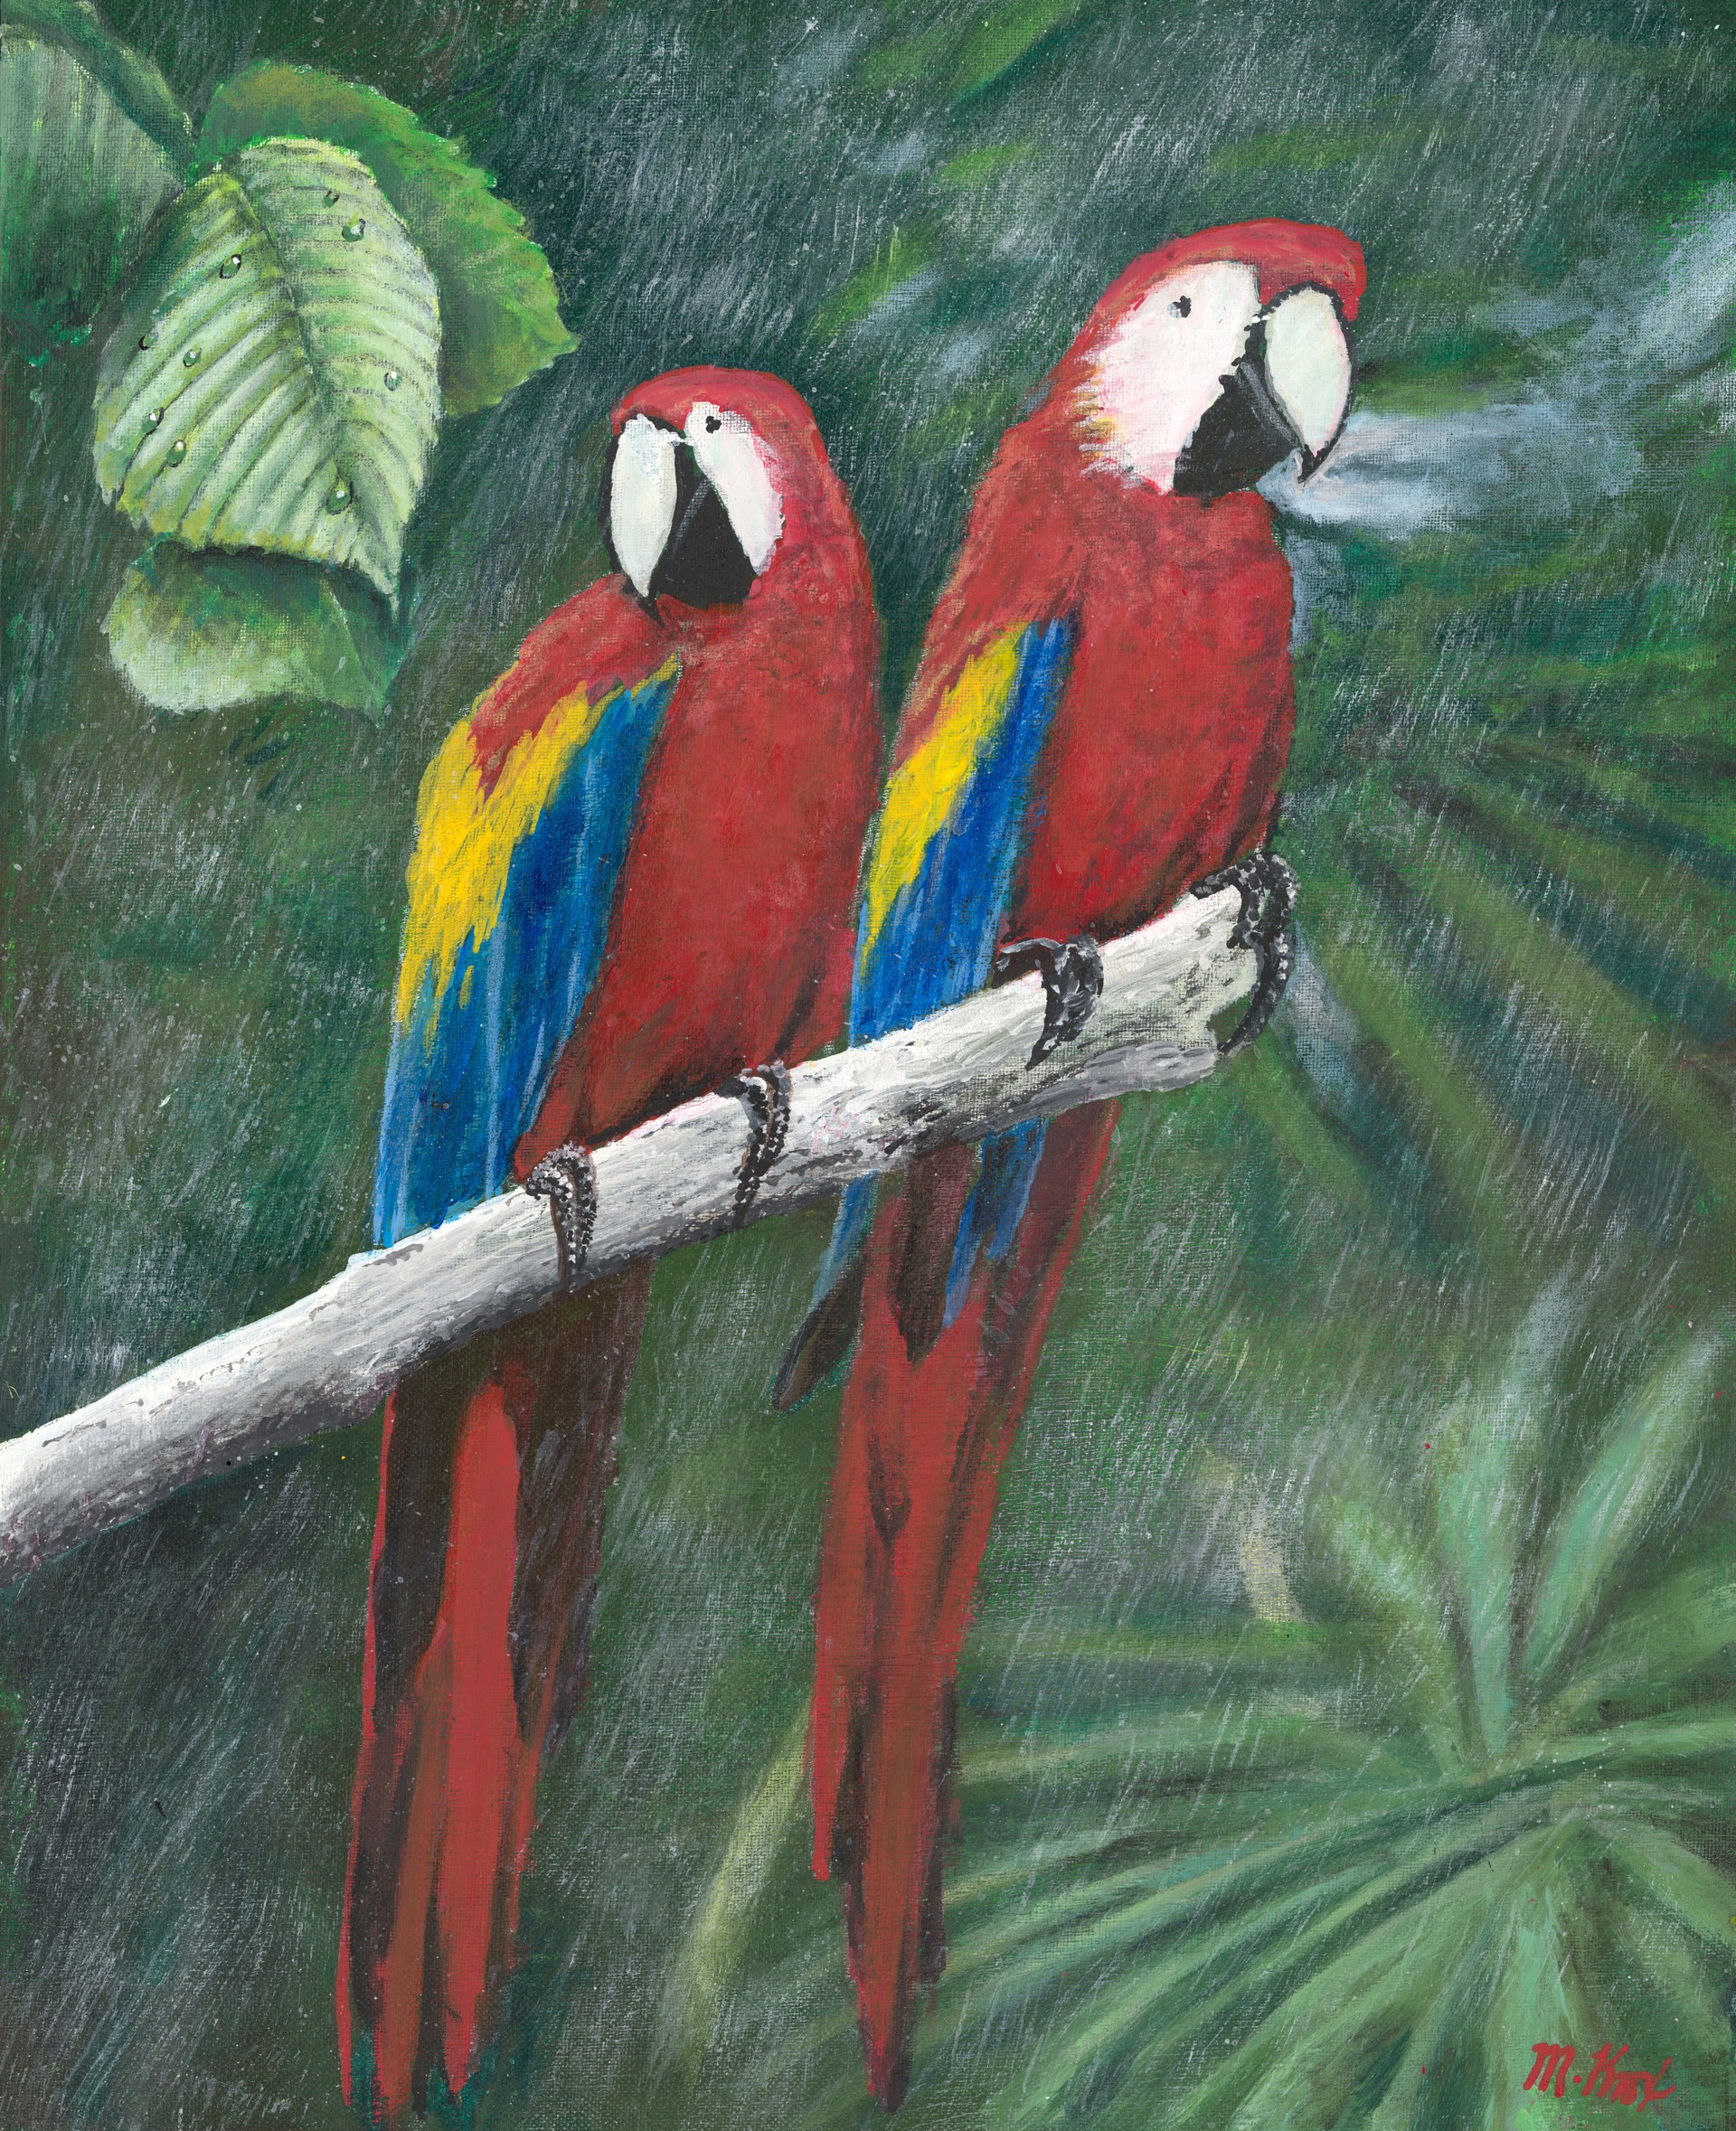 Macaw of the Wild by Mike Knox